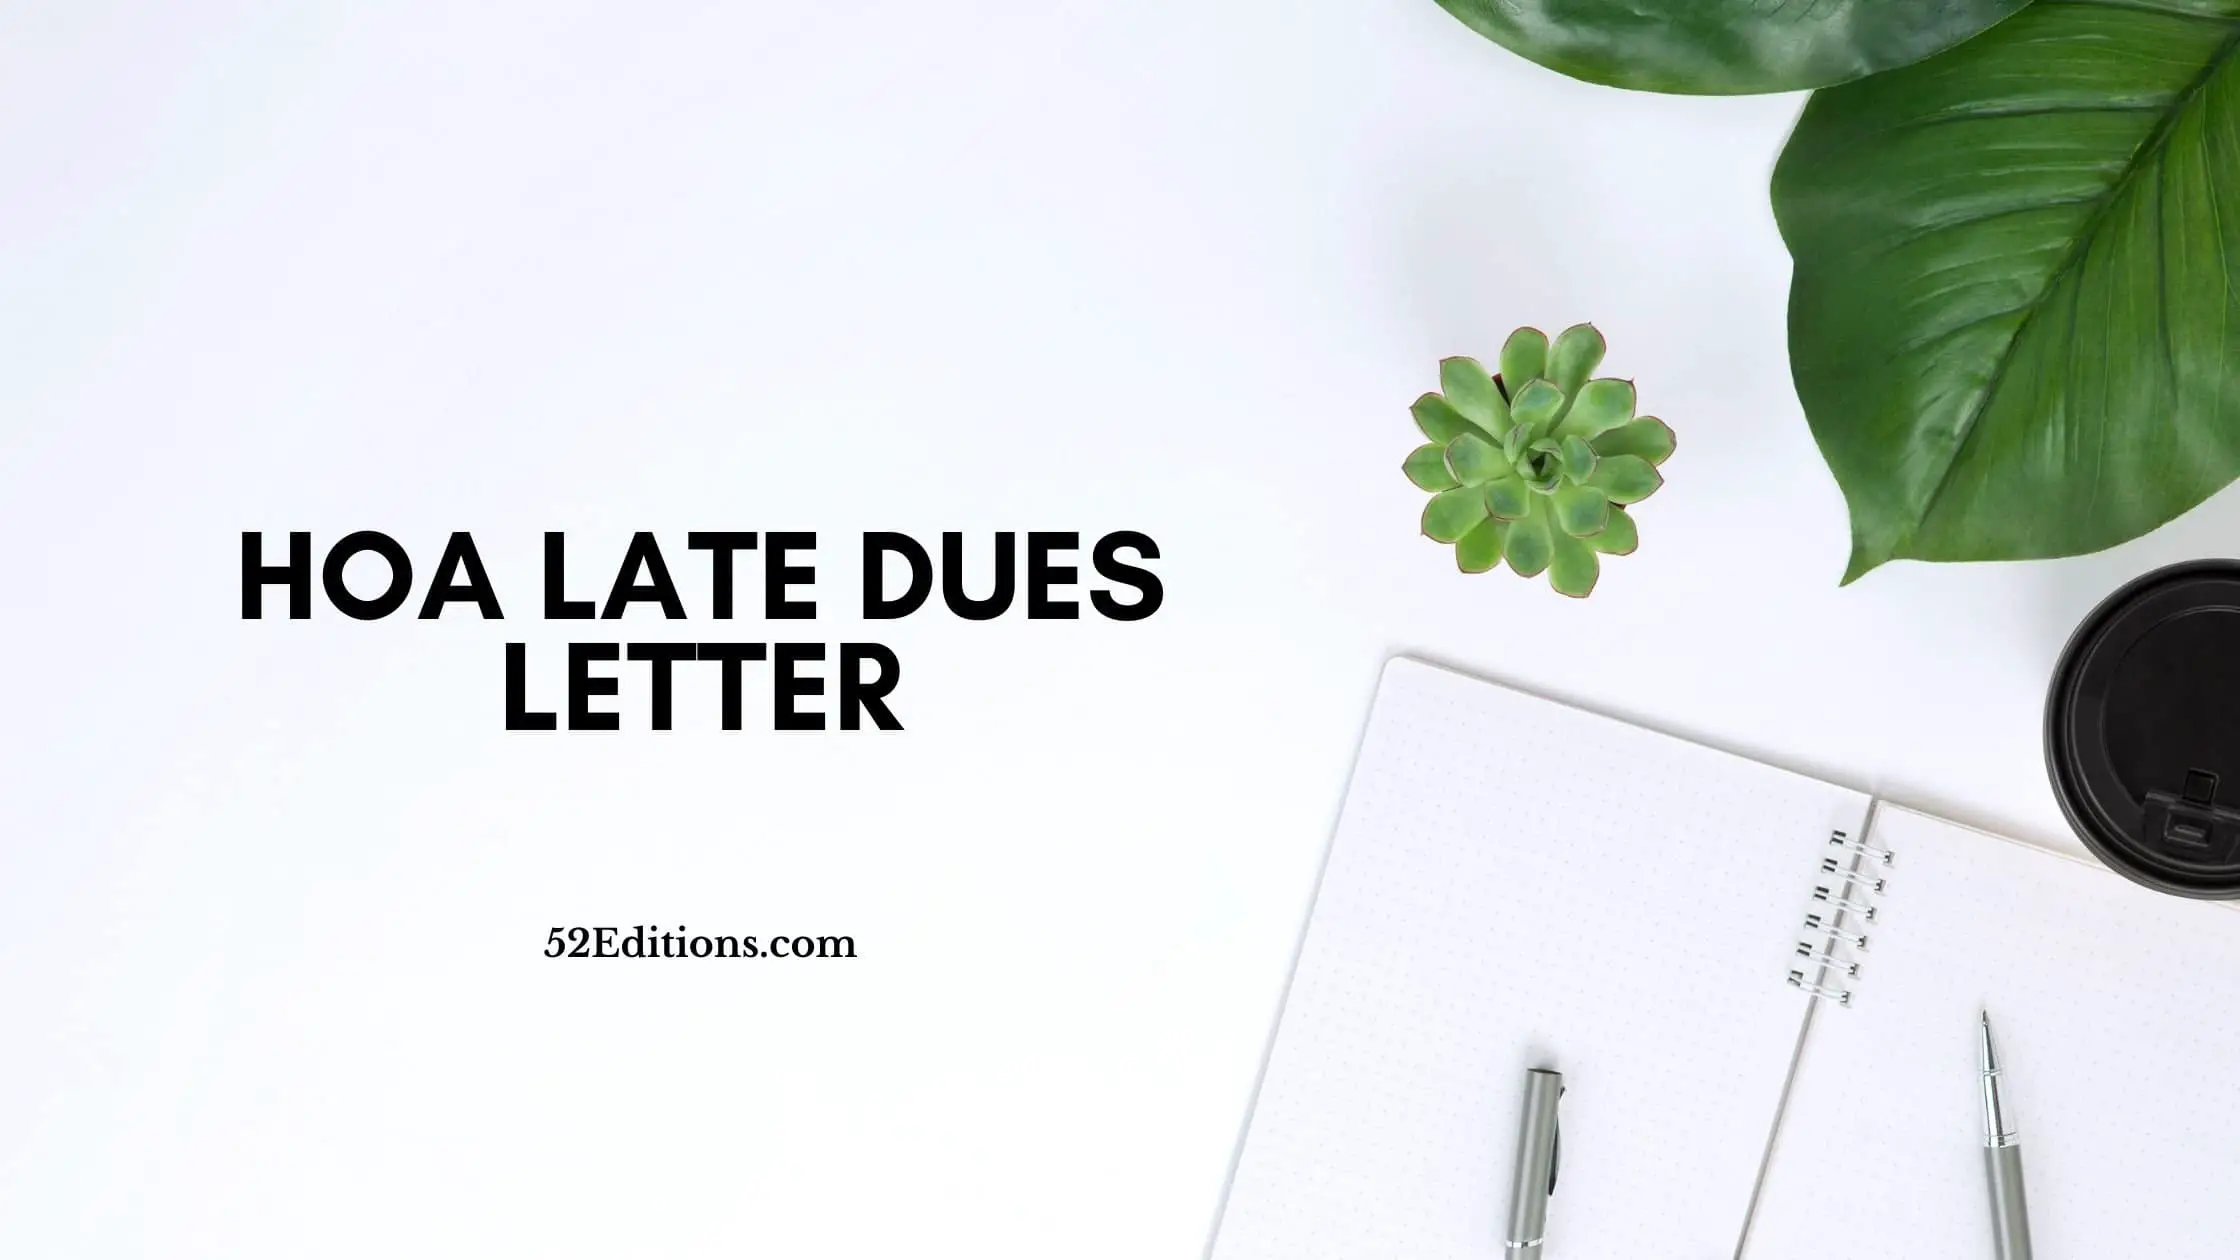 free-hoa-dues-letter-template